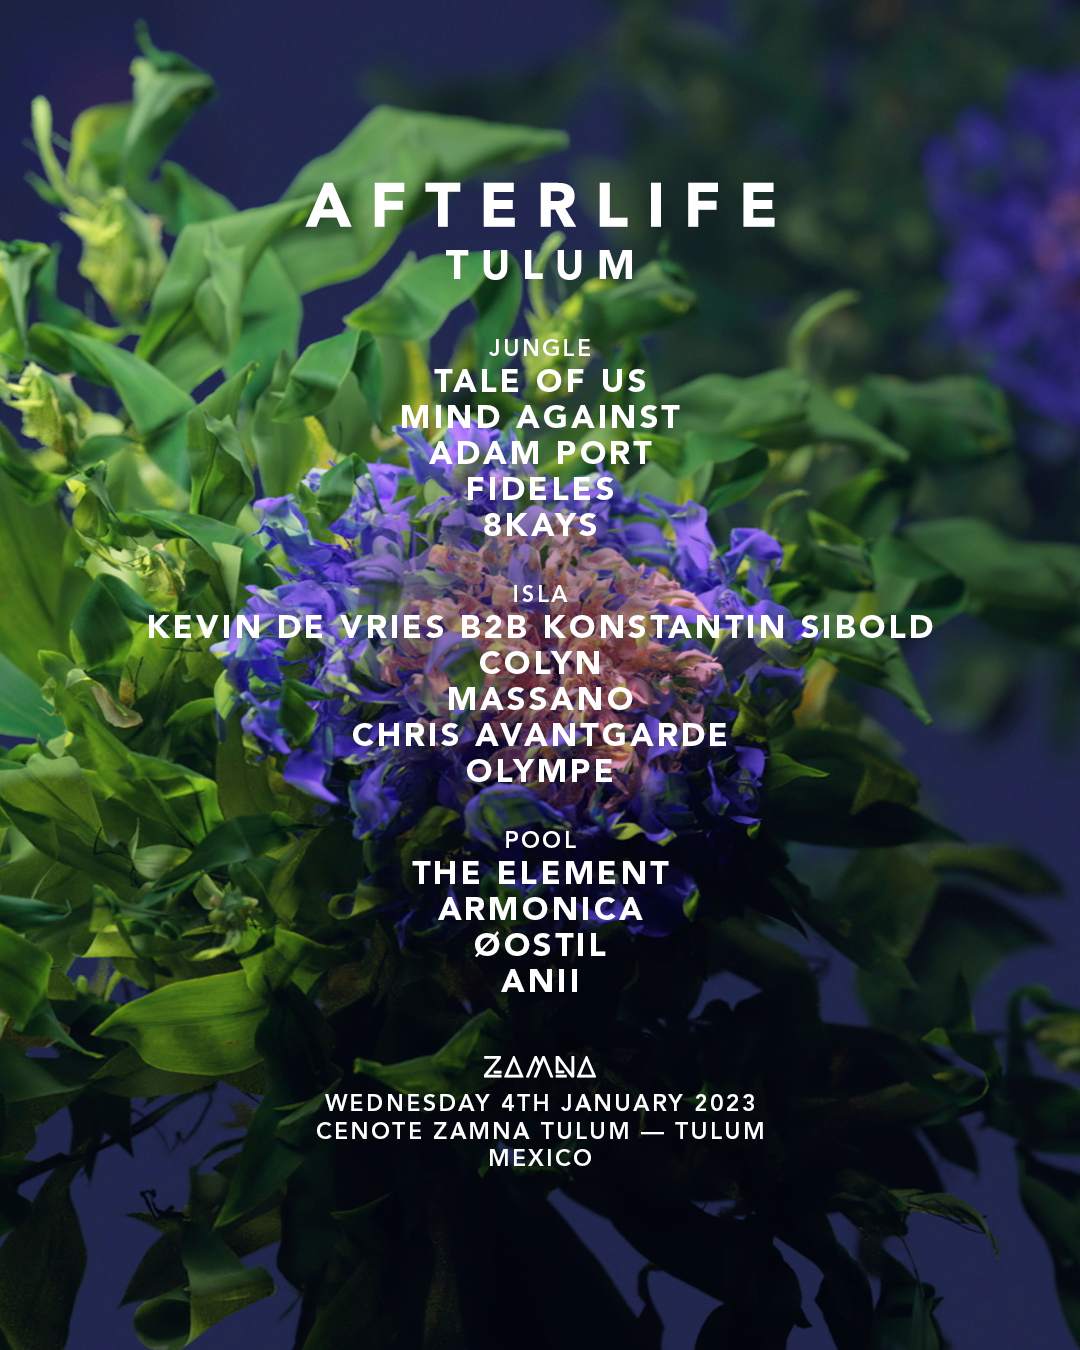 Afterlife Tulum 2024 at Zamna. Honored to be part of this epic event  alongside many friends. Special thanks to @taleofus @anyma @mrak_ofc…